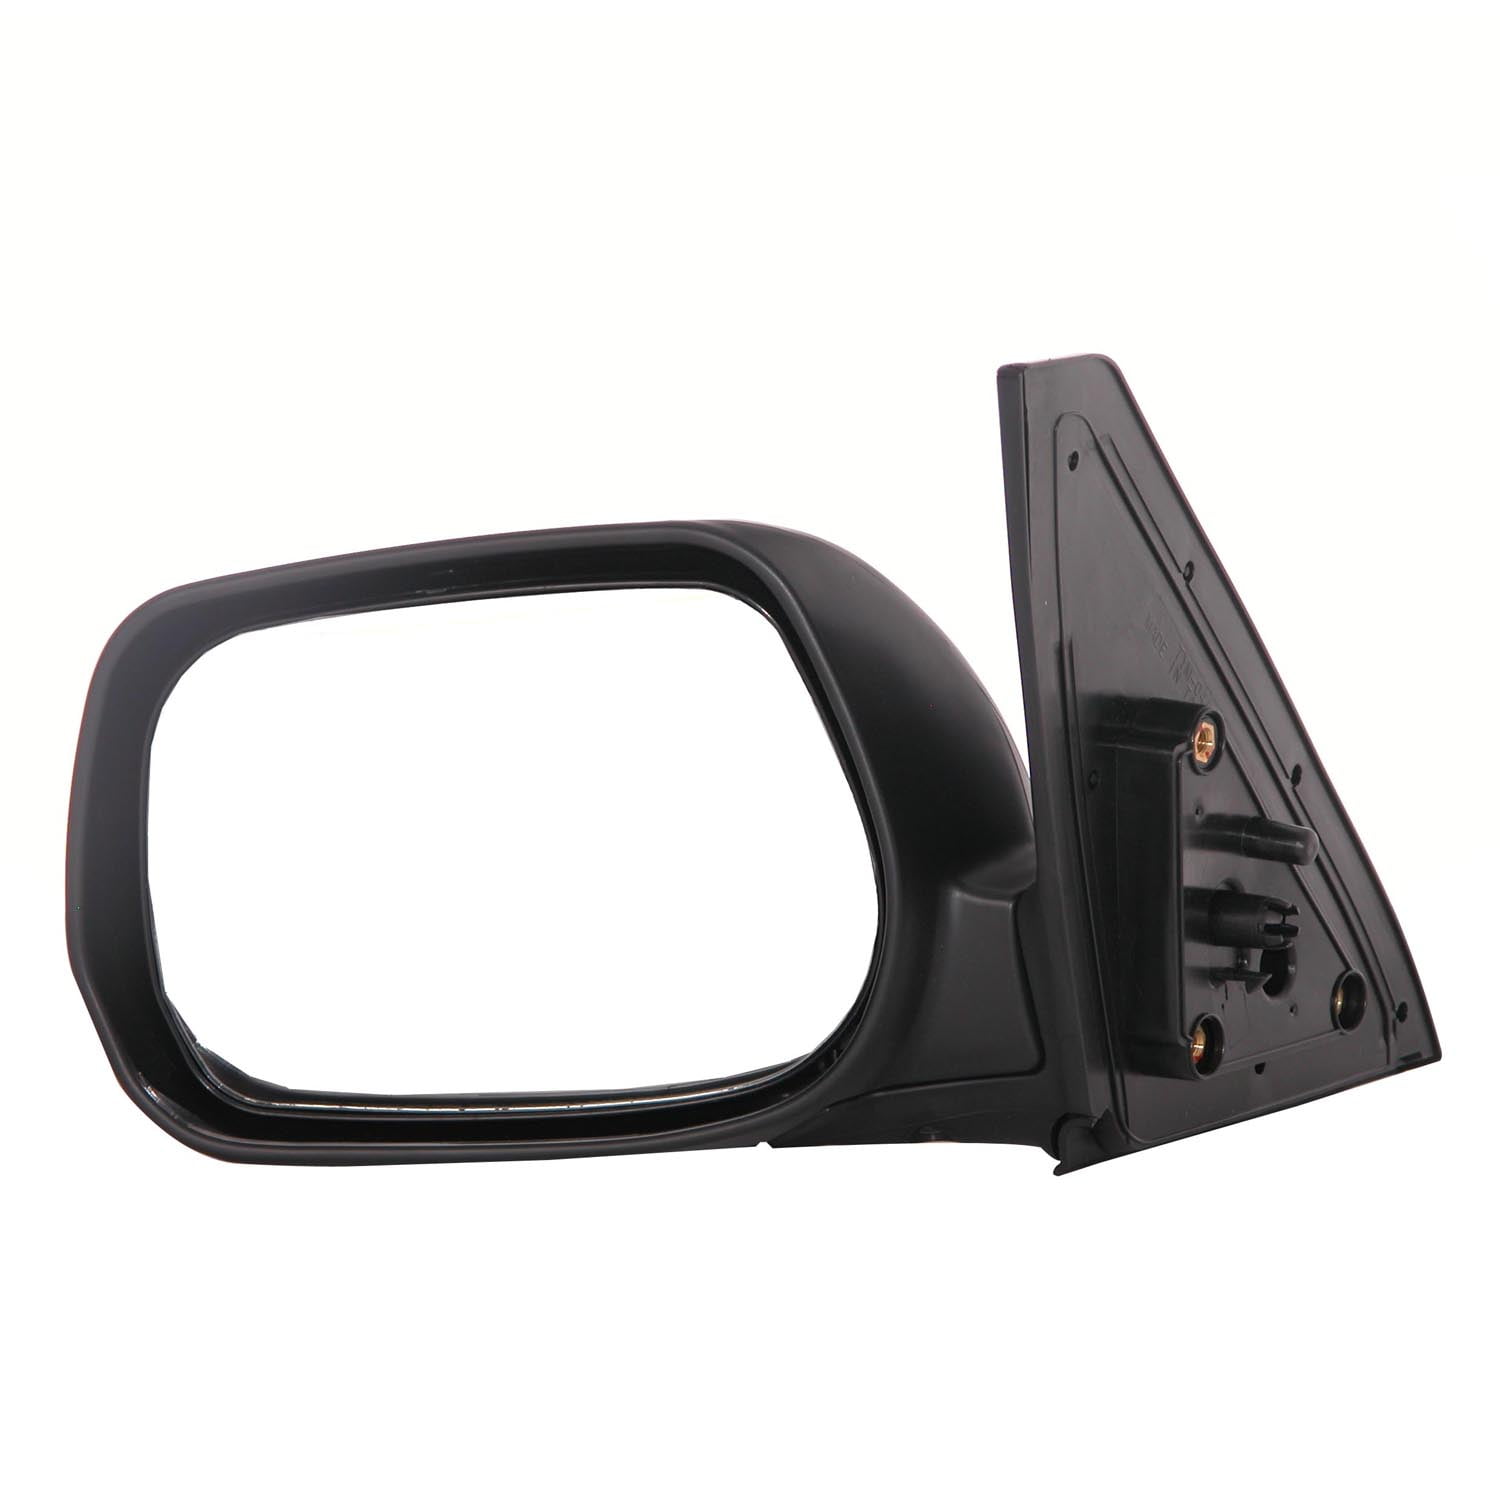 Original Style Replacement Mirror Toyota Driver Side Manual Foldaway Non-Heated Black